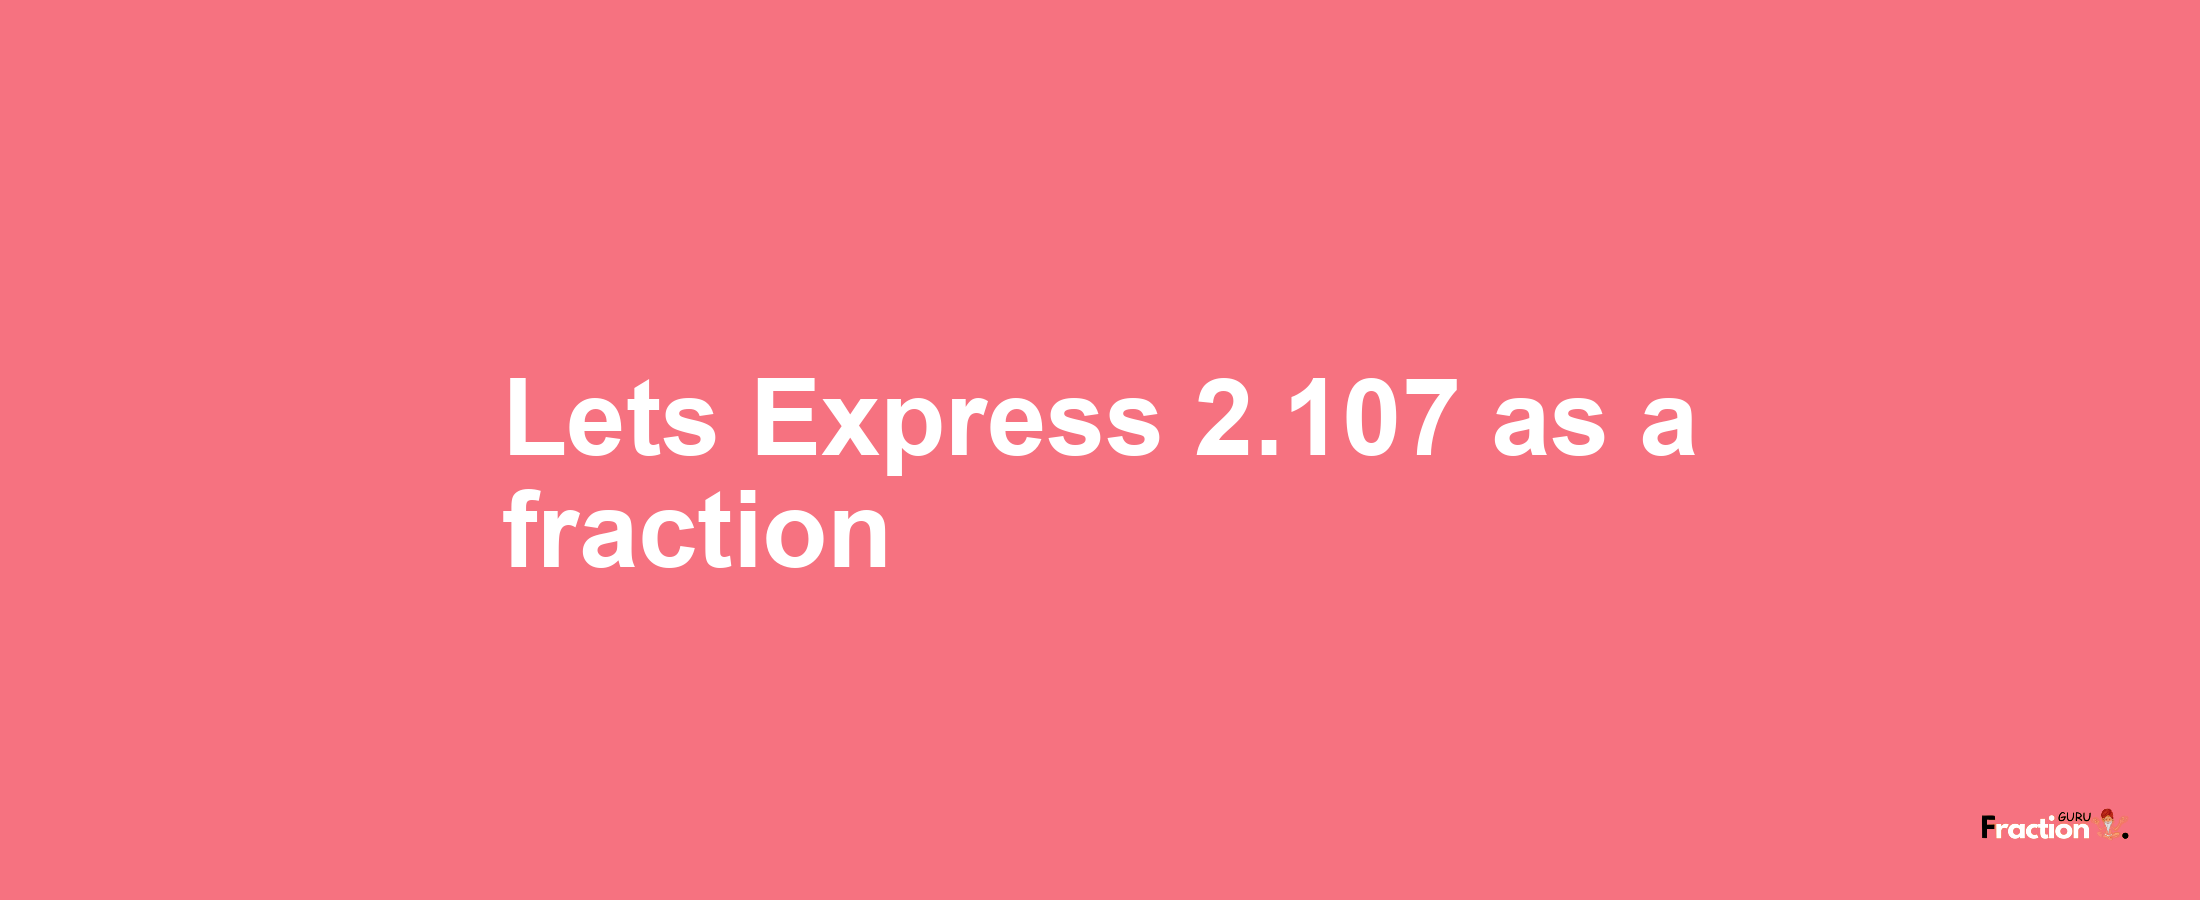 Lets Express 2.107 as afraction